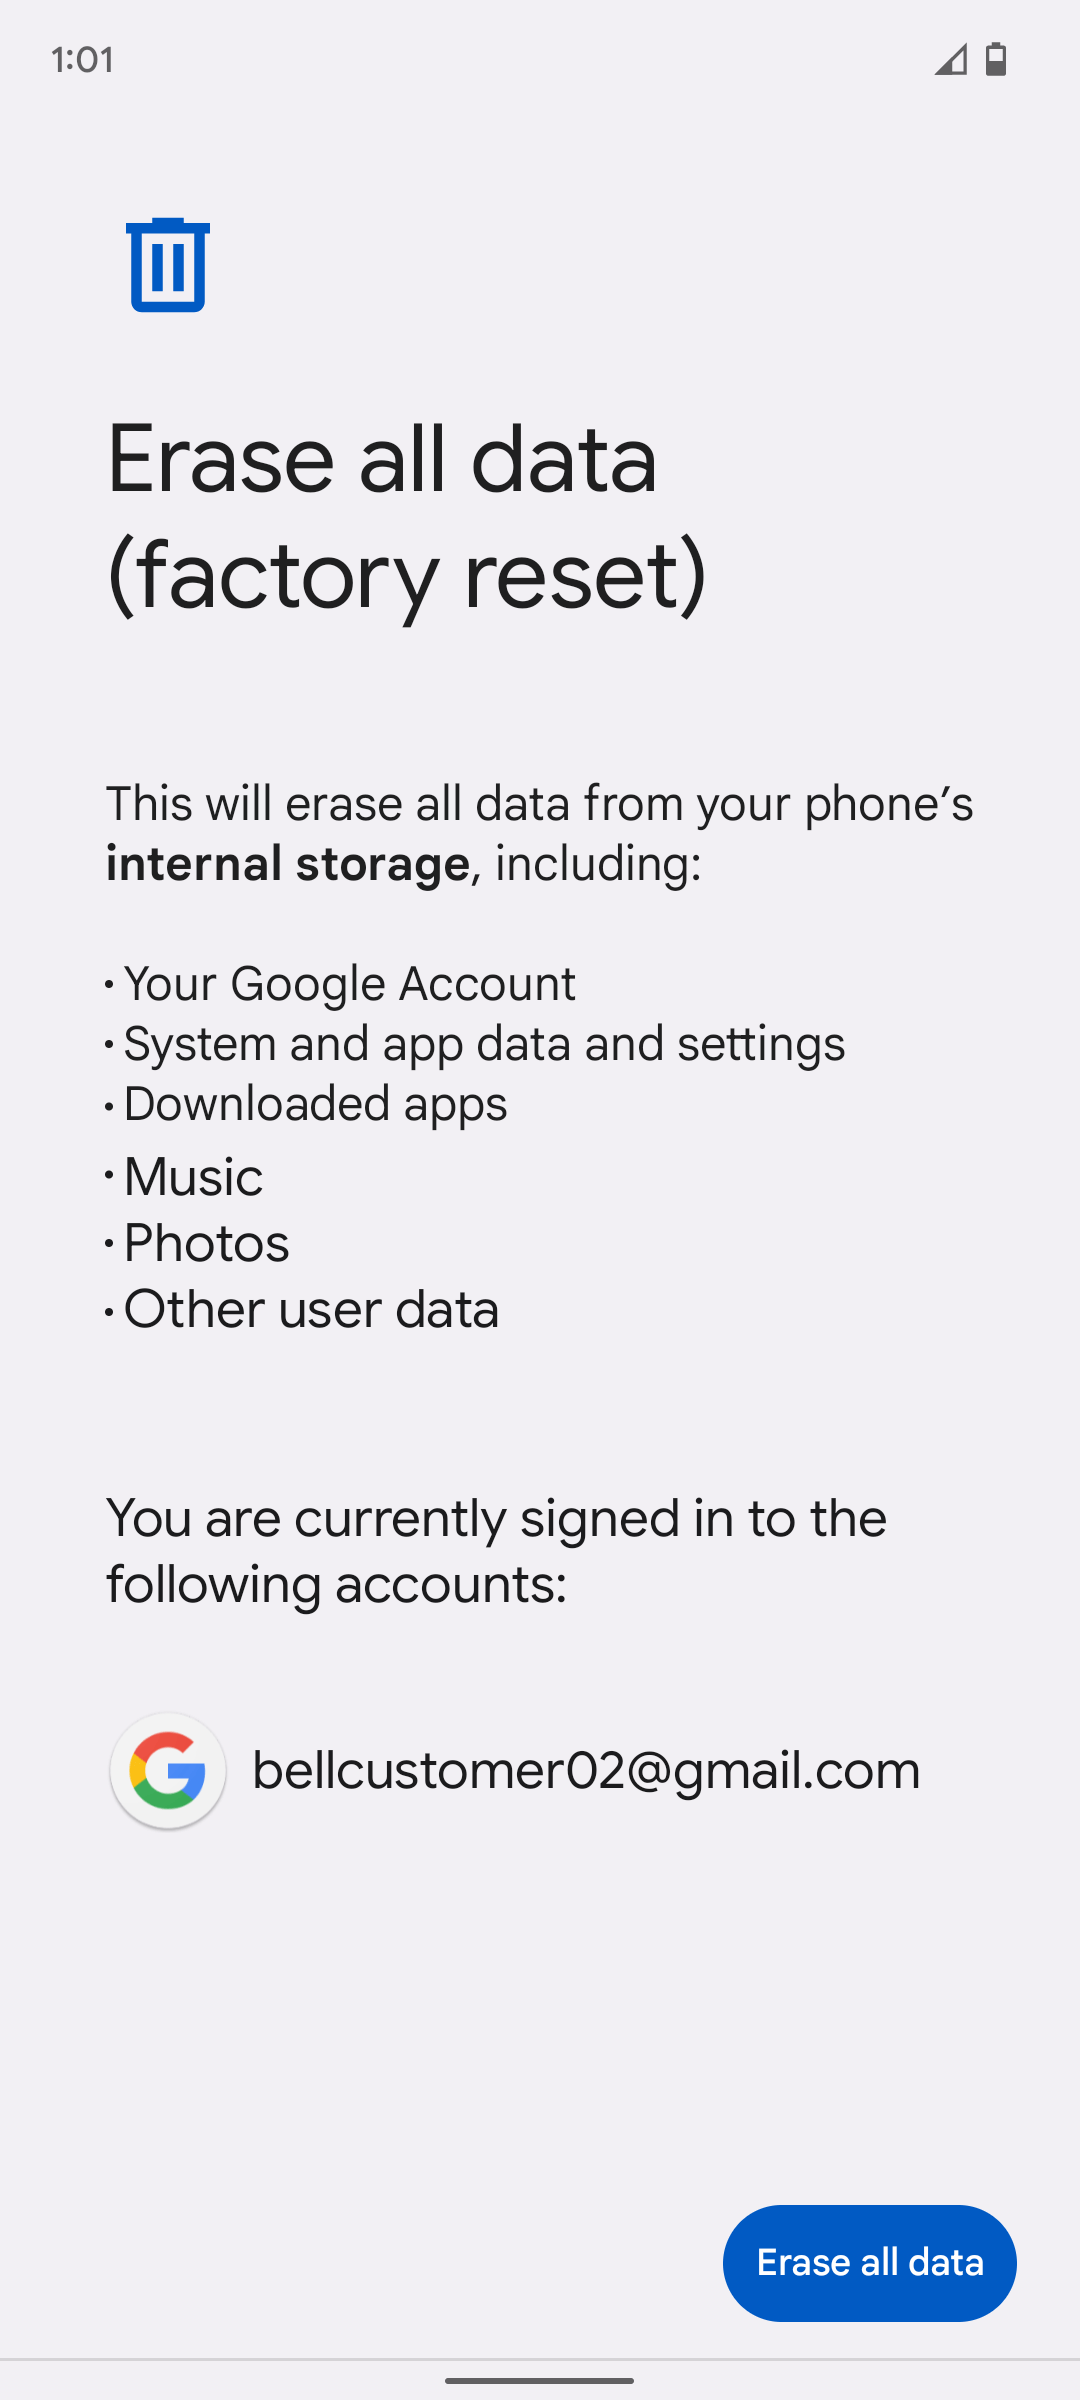 Read the warning, then scroll to and touch Erase all data.